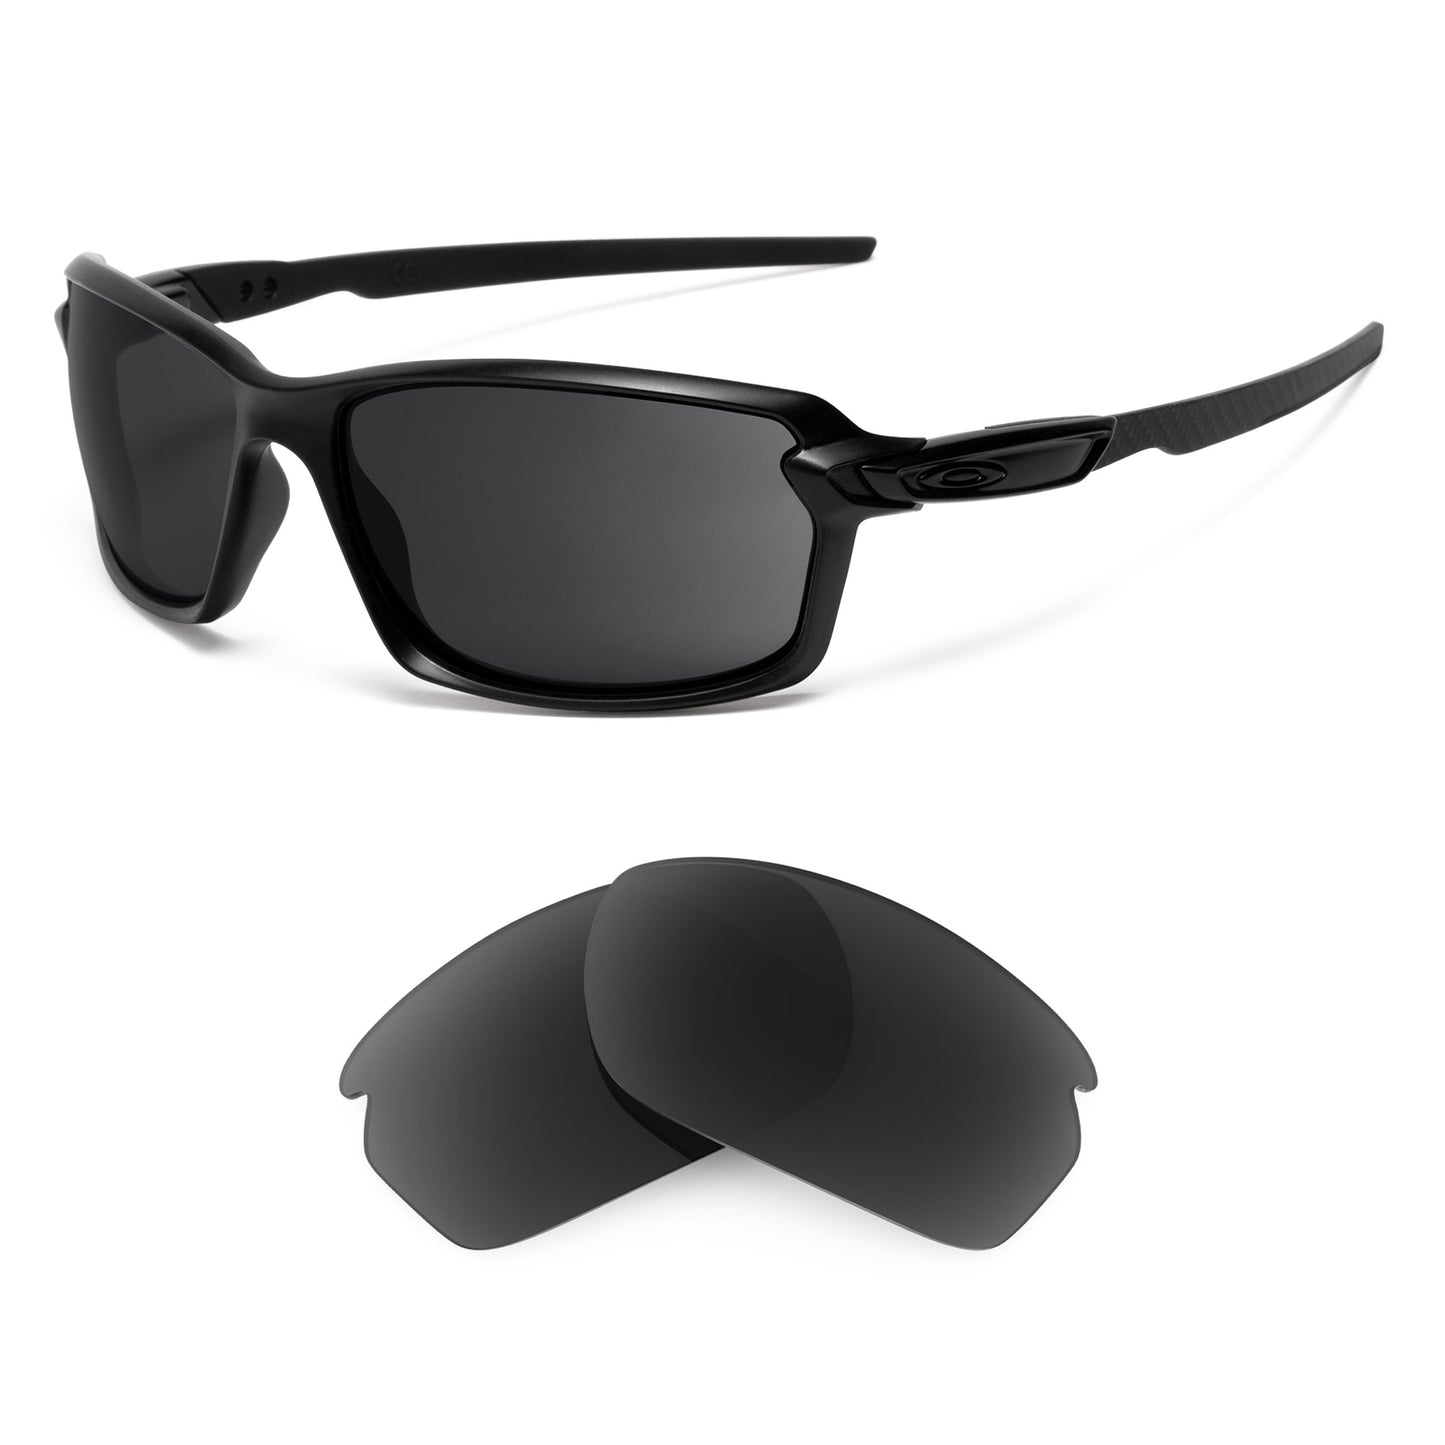 Oakley Carbon Shift sunglasses with replacement lenses